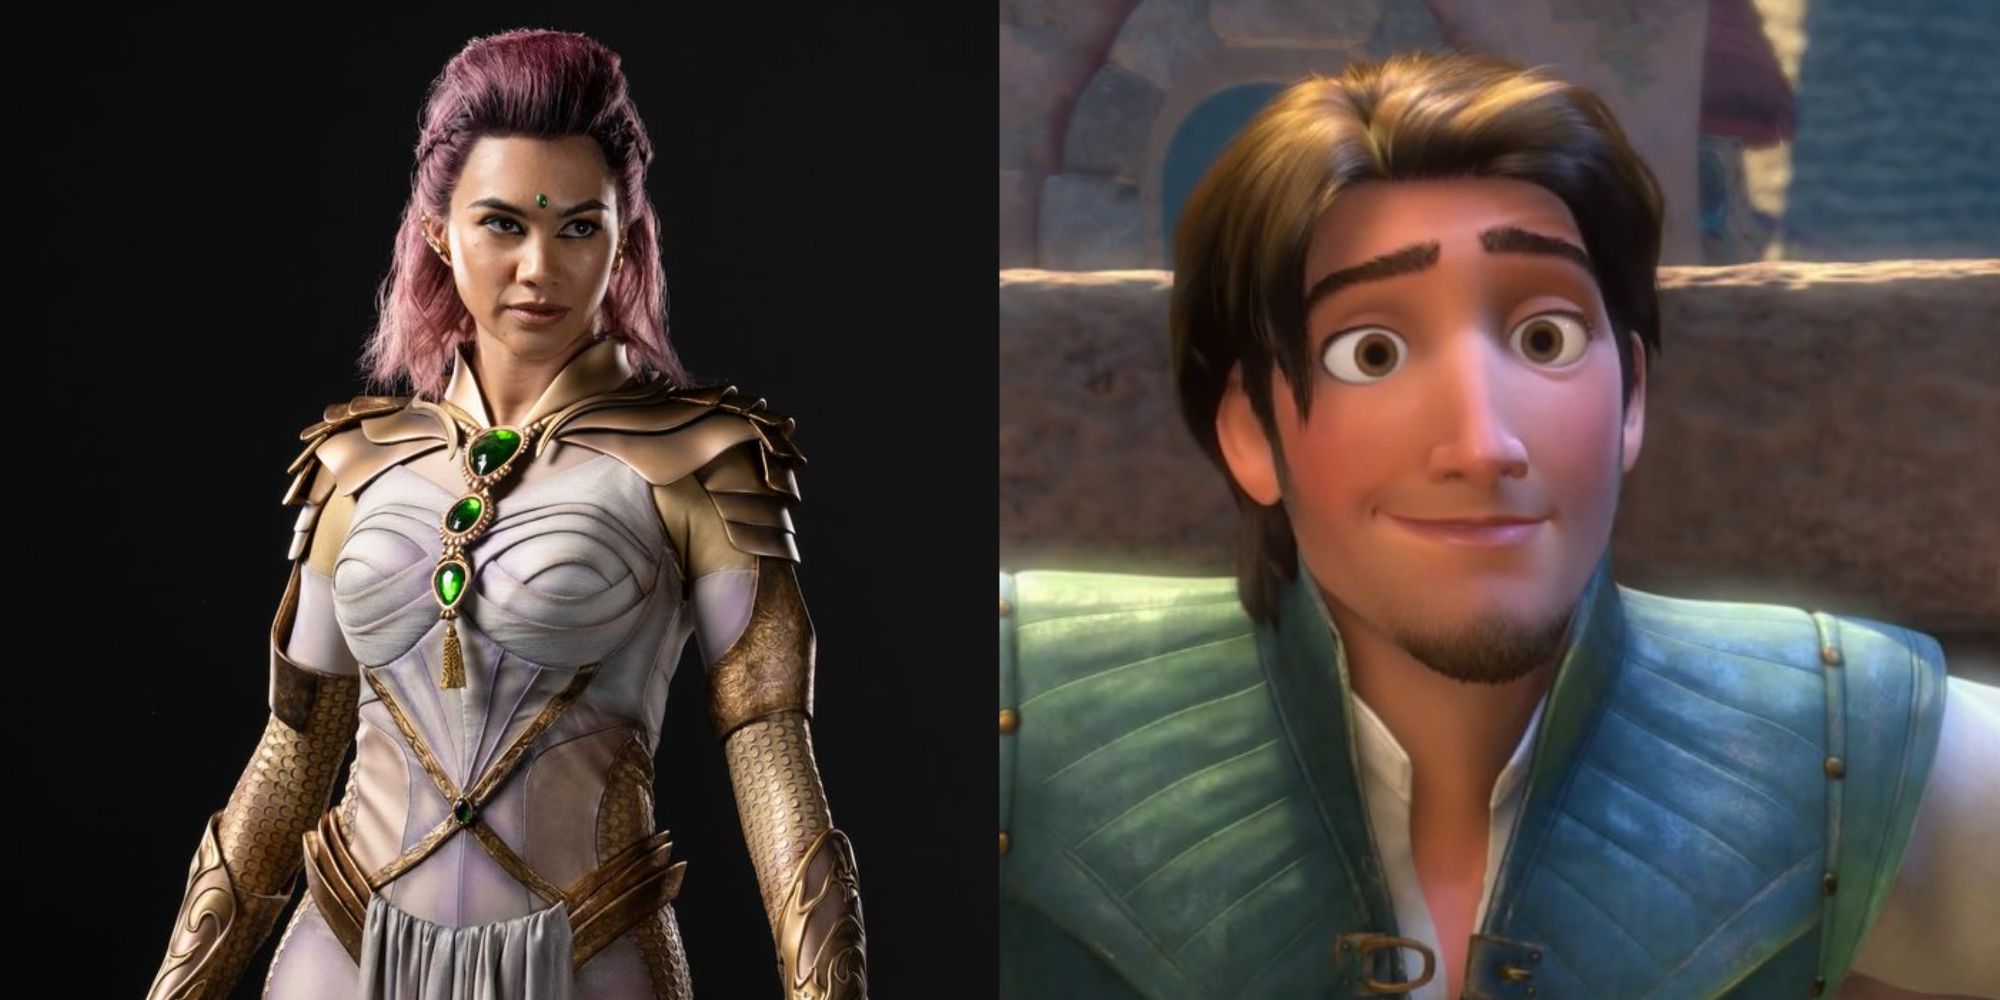 A split image of Jinx in Titans and Flynn Rider in Tangled